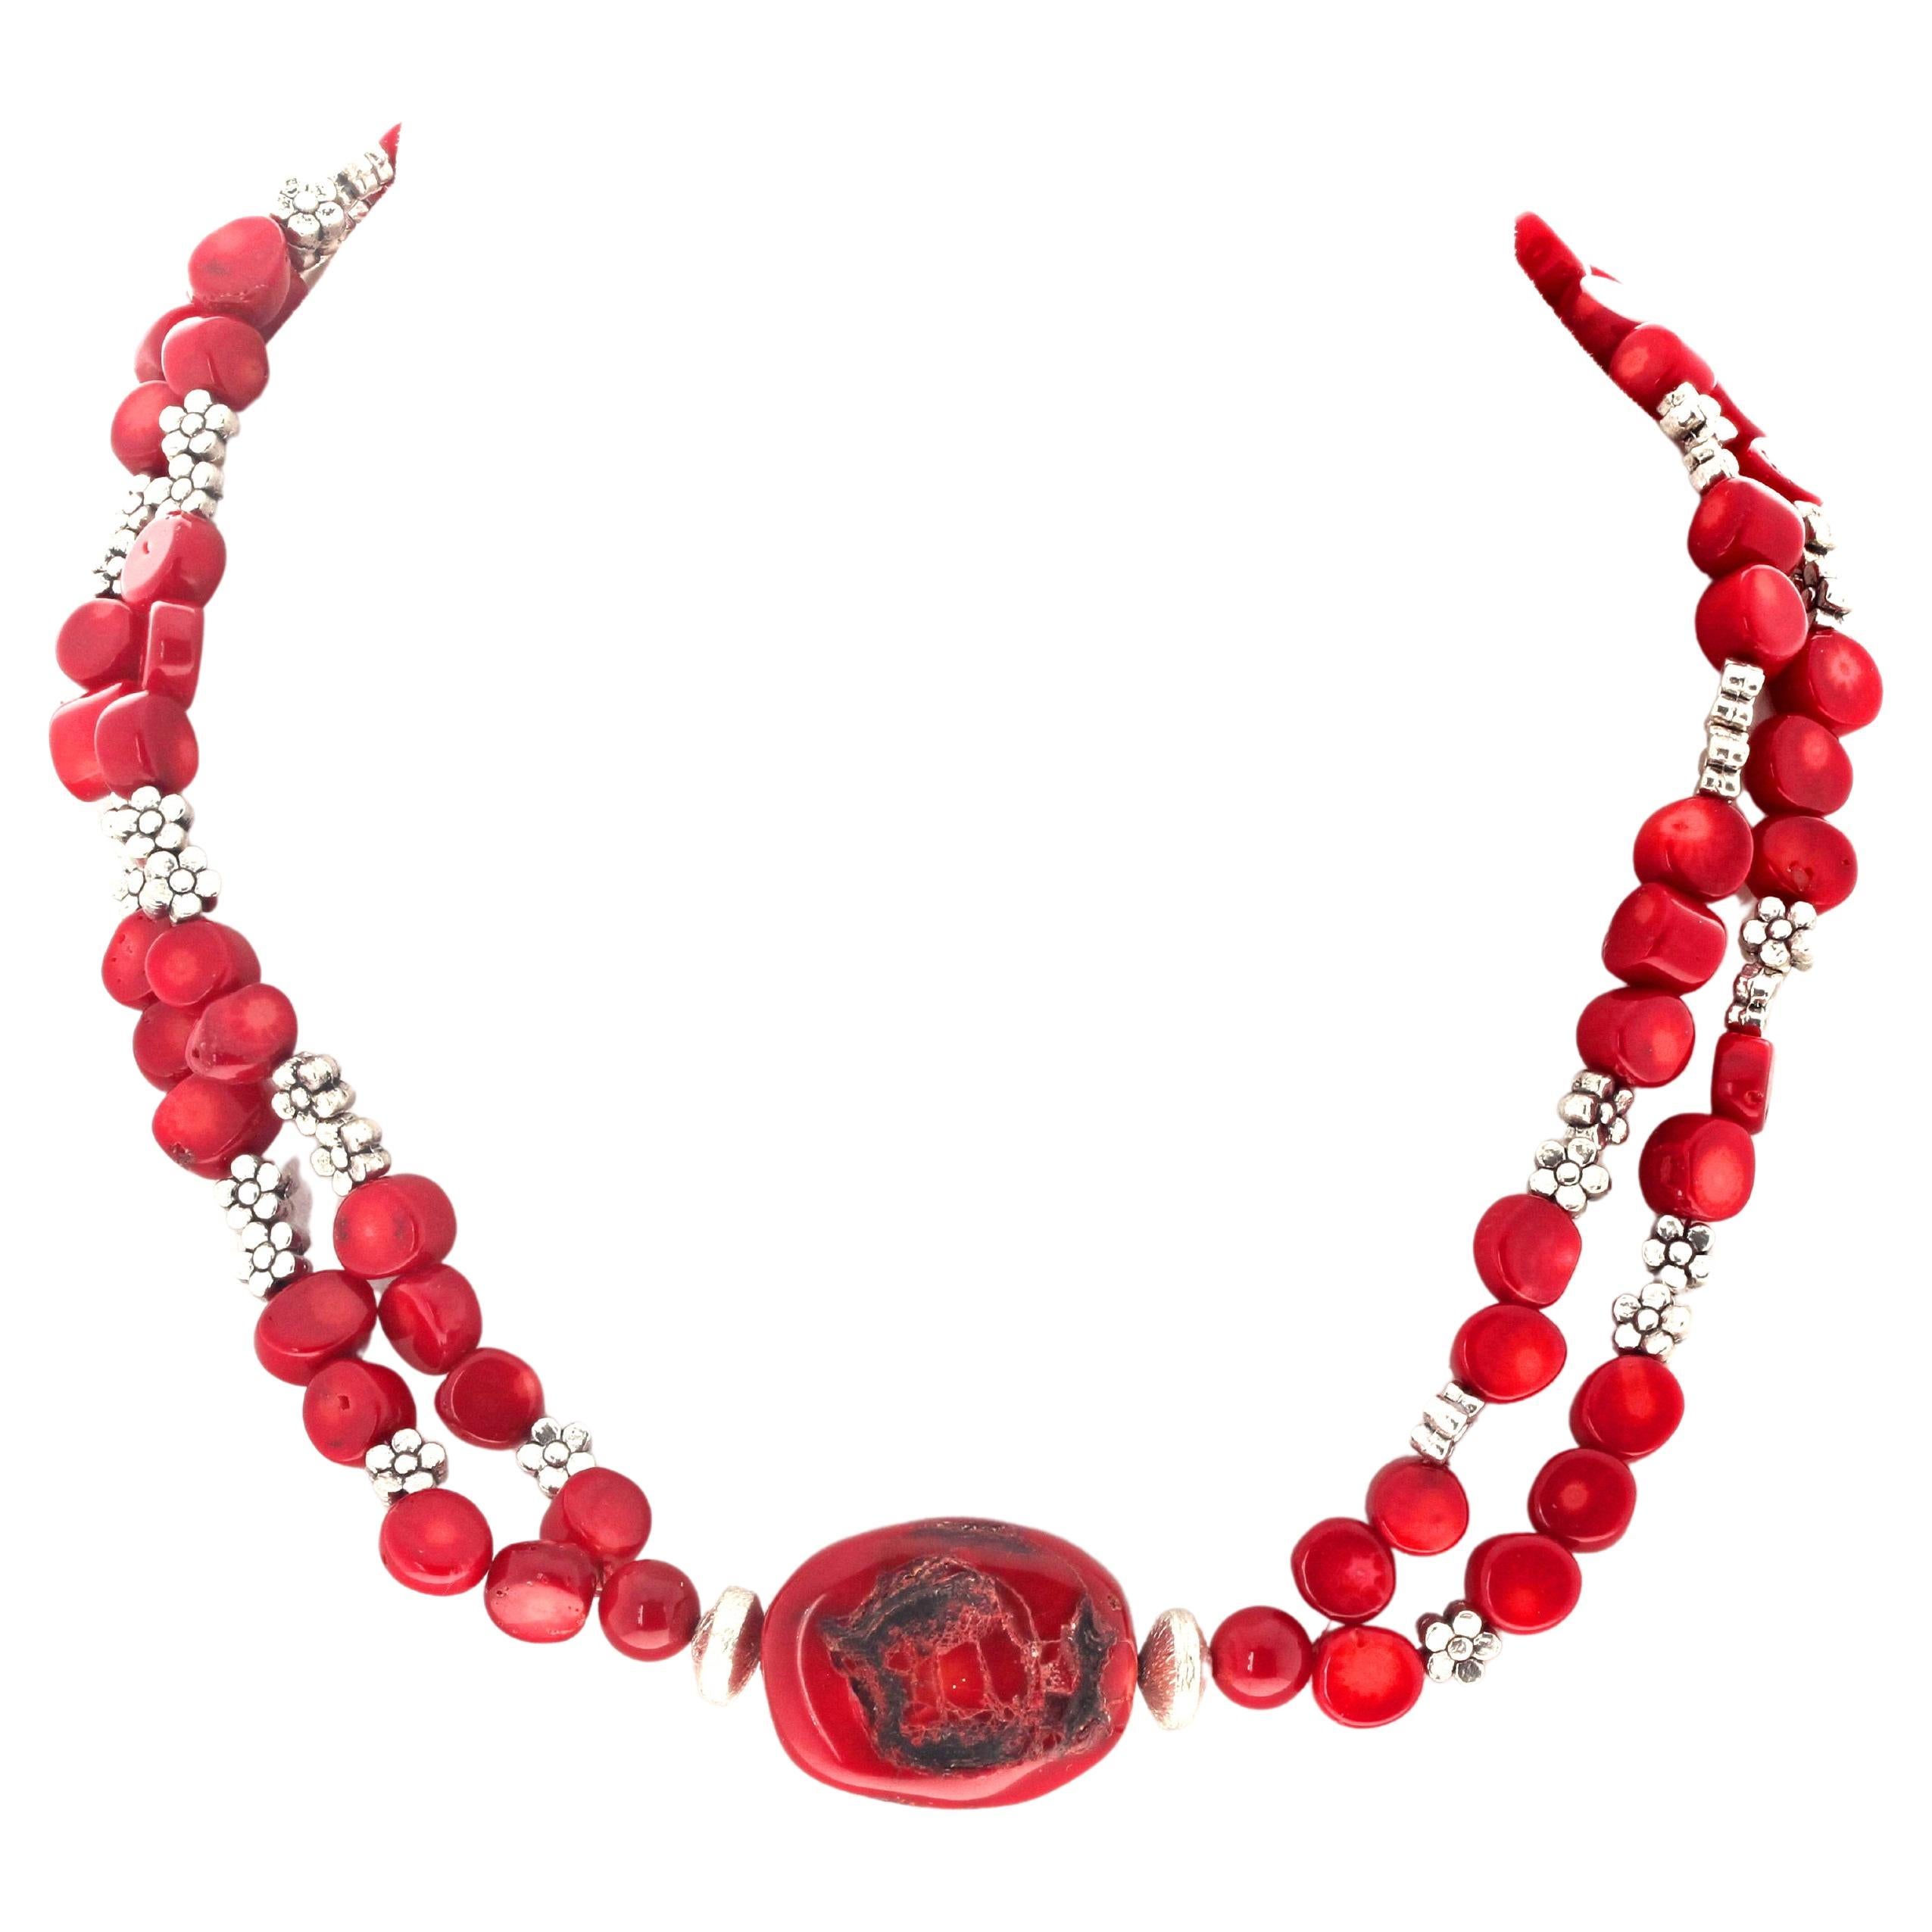 AJD Natural Artistic Red Coral & Silver Flowers 15 1/2" Double Strand Necklace